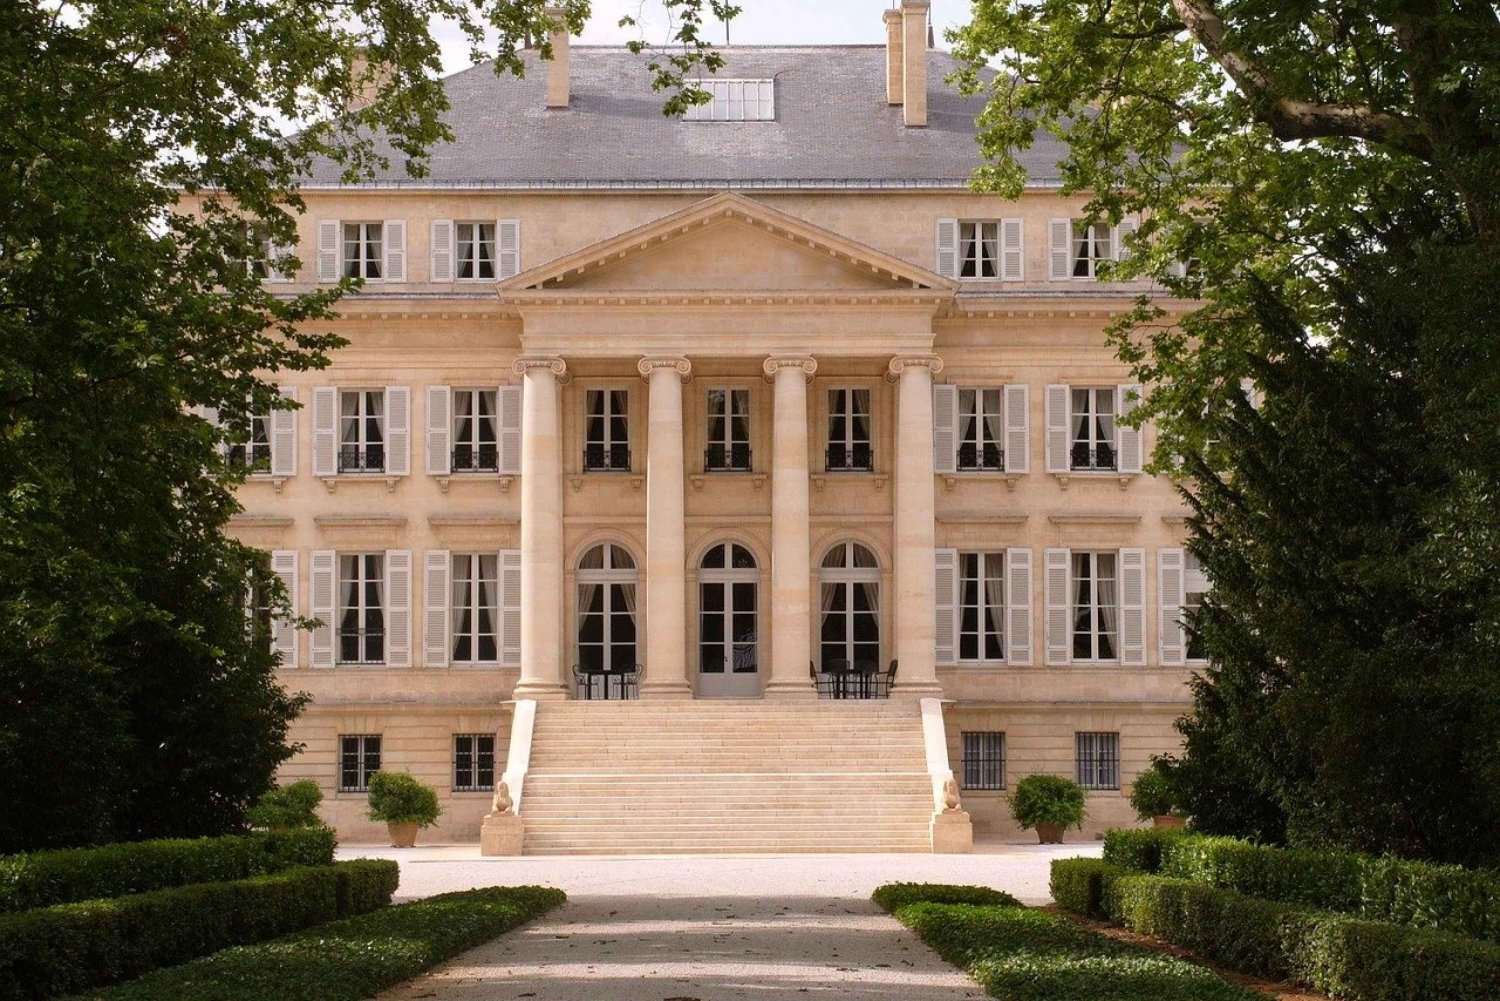 Bordeaux: an Afternoon in Margaux